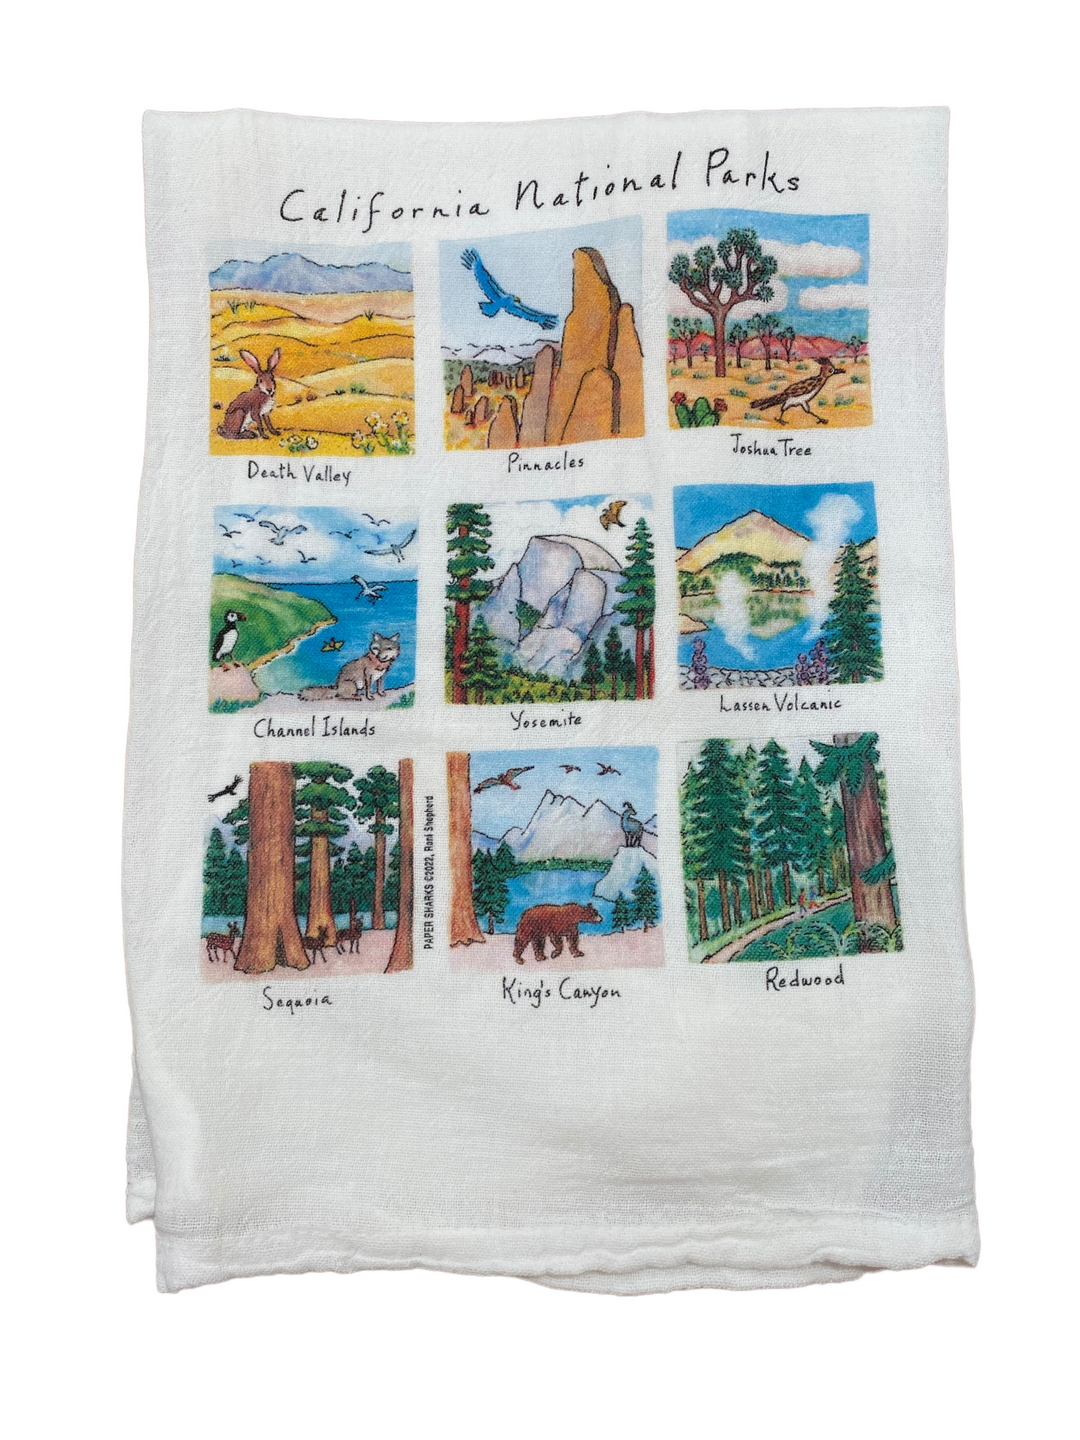 CALIFORNIA NATIONAL PARKS - Kingfisher Road - Online Boutique